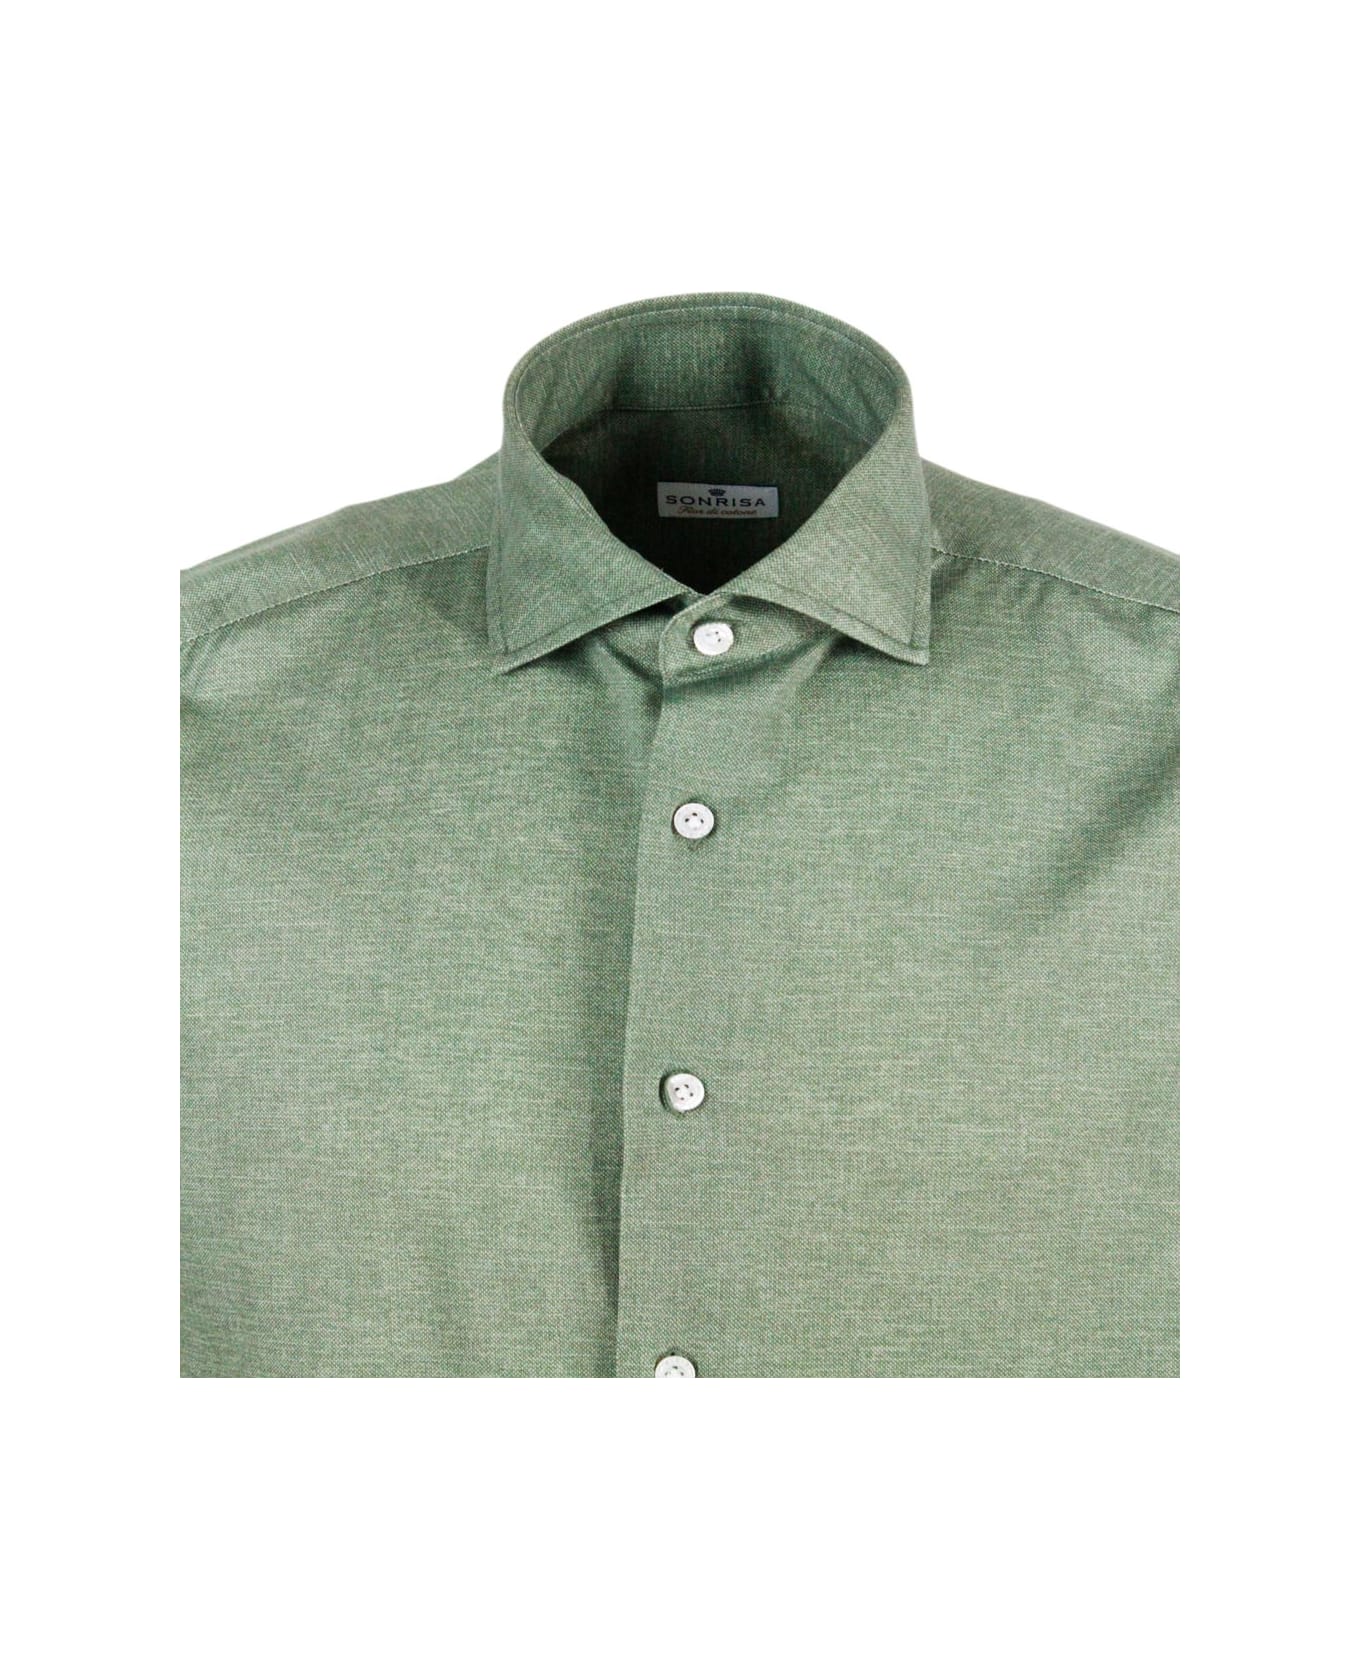 Sonrisa Luxury Shirt In Soft, Precious And Very Fine Stretch Cotton Flower With French Collar In Two-tone Melange Print - Green